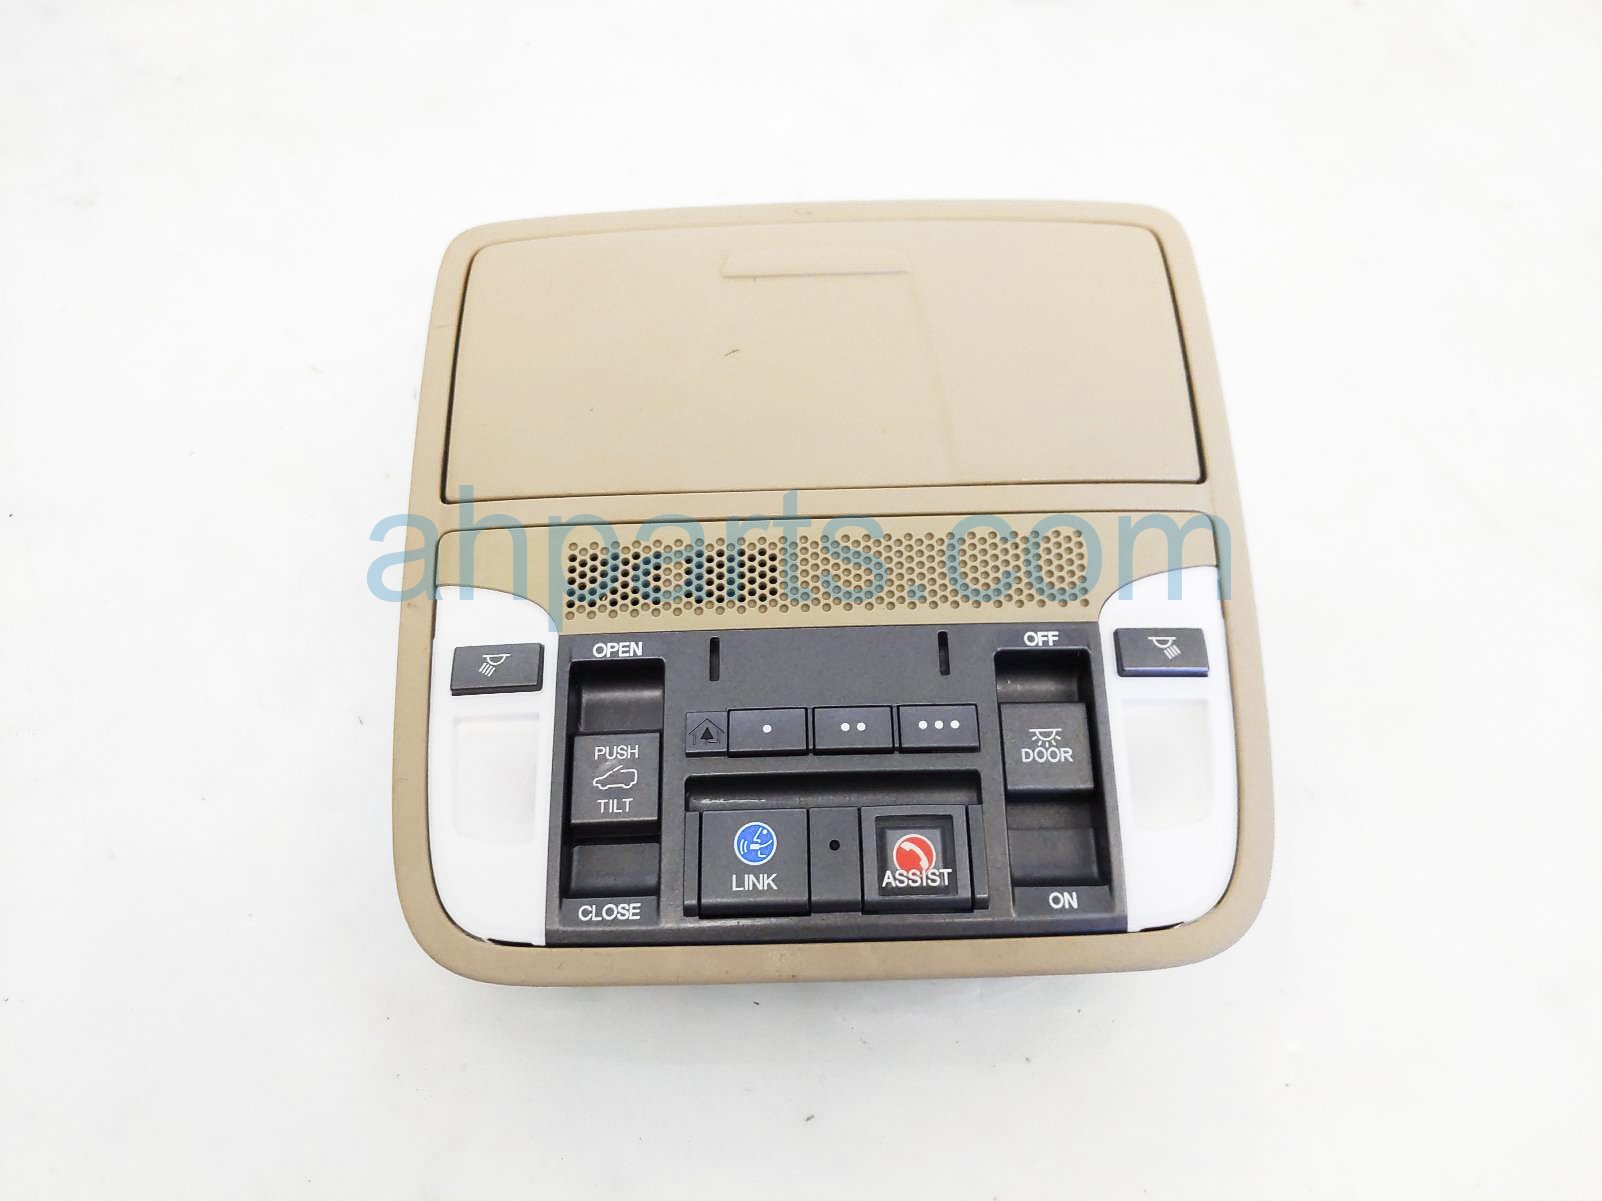 $50 Acura MAP LIGHT / ROOF CONSOLE - TAN